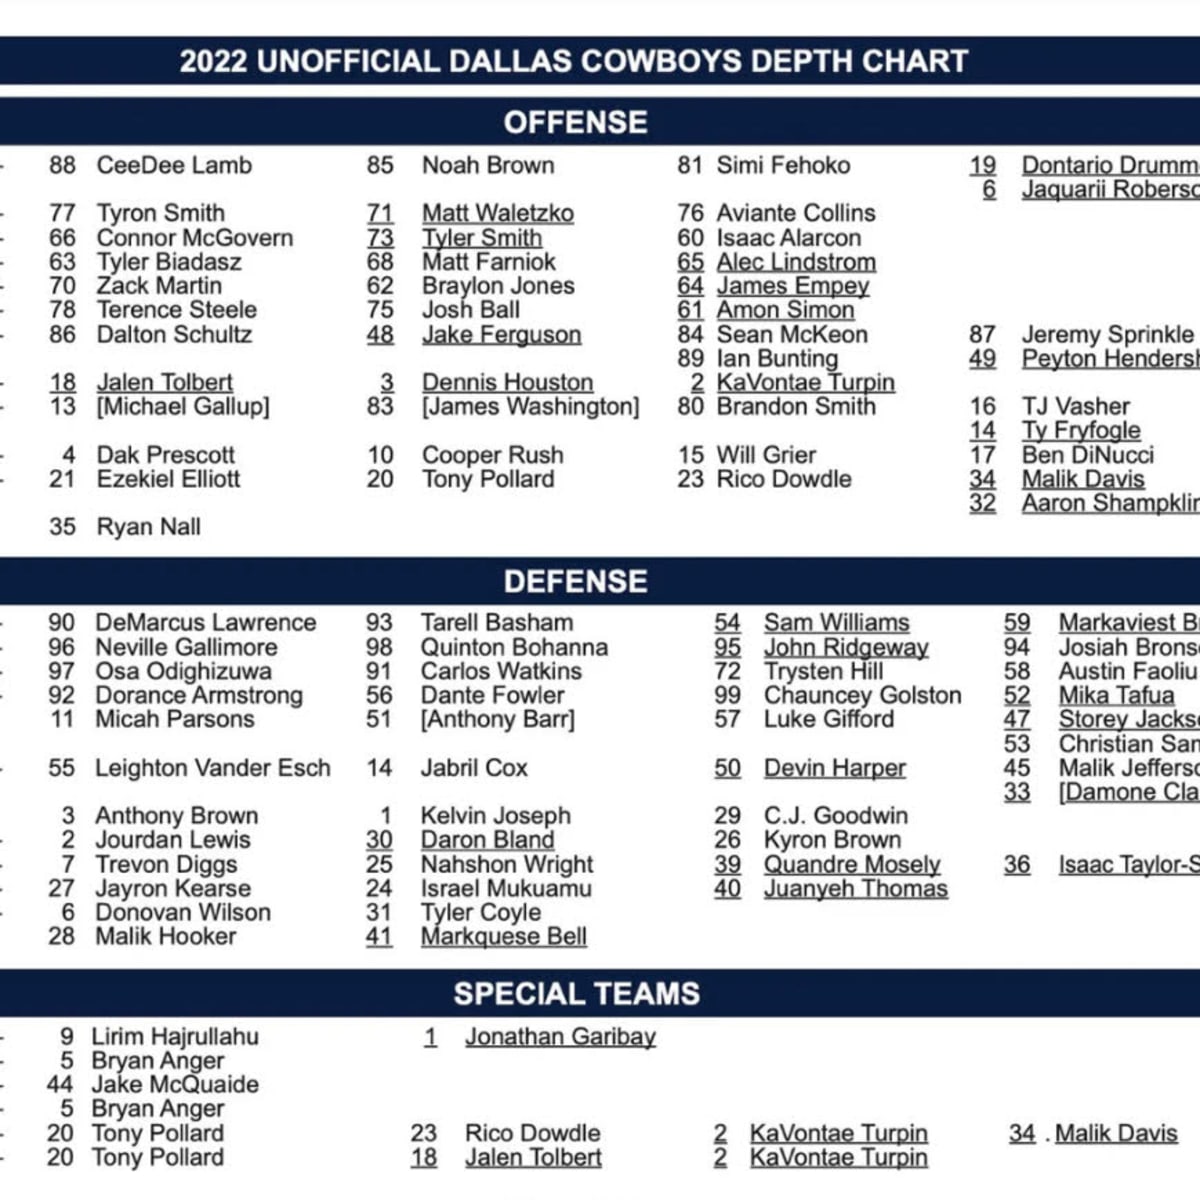 Dallas Cowboys release first unofficial depth chart of the 2022